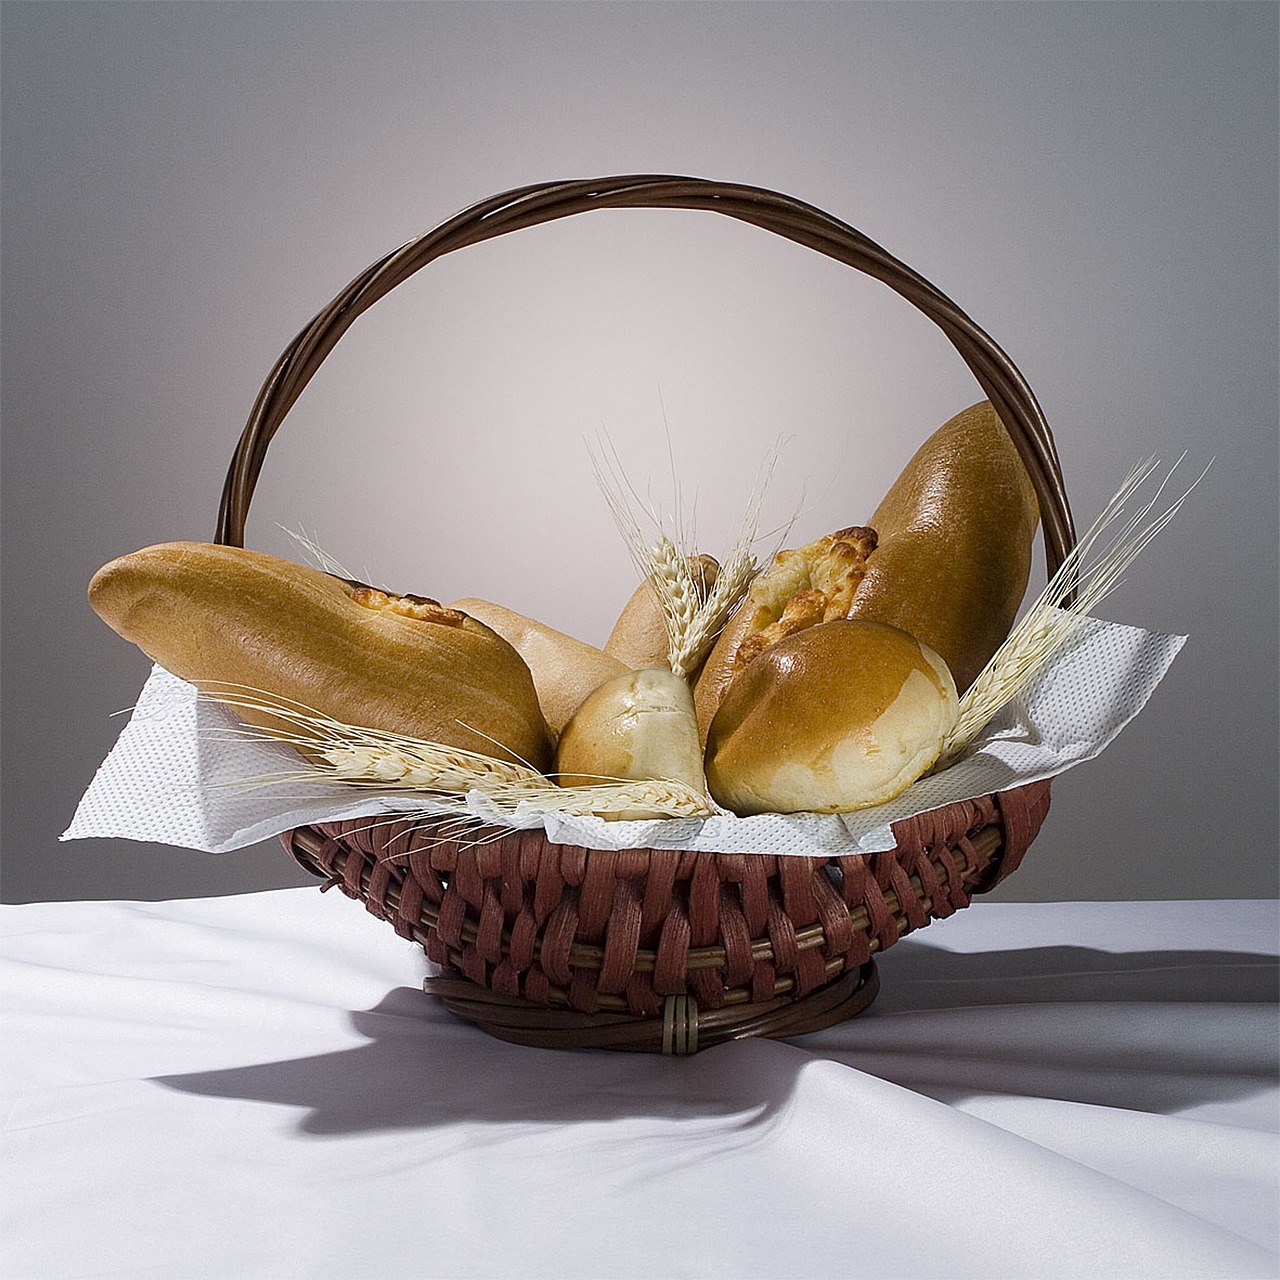 still life basket with breads free photo